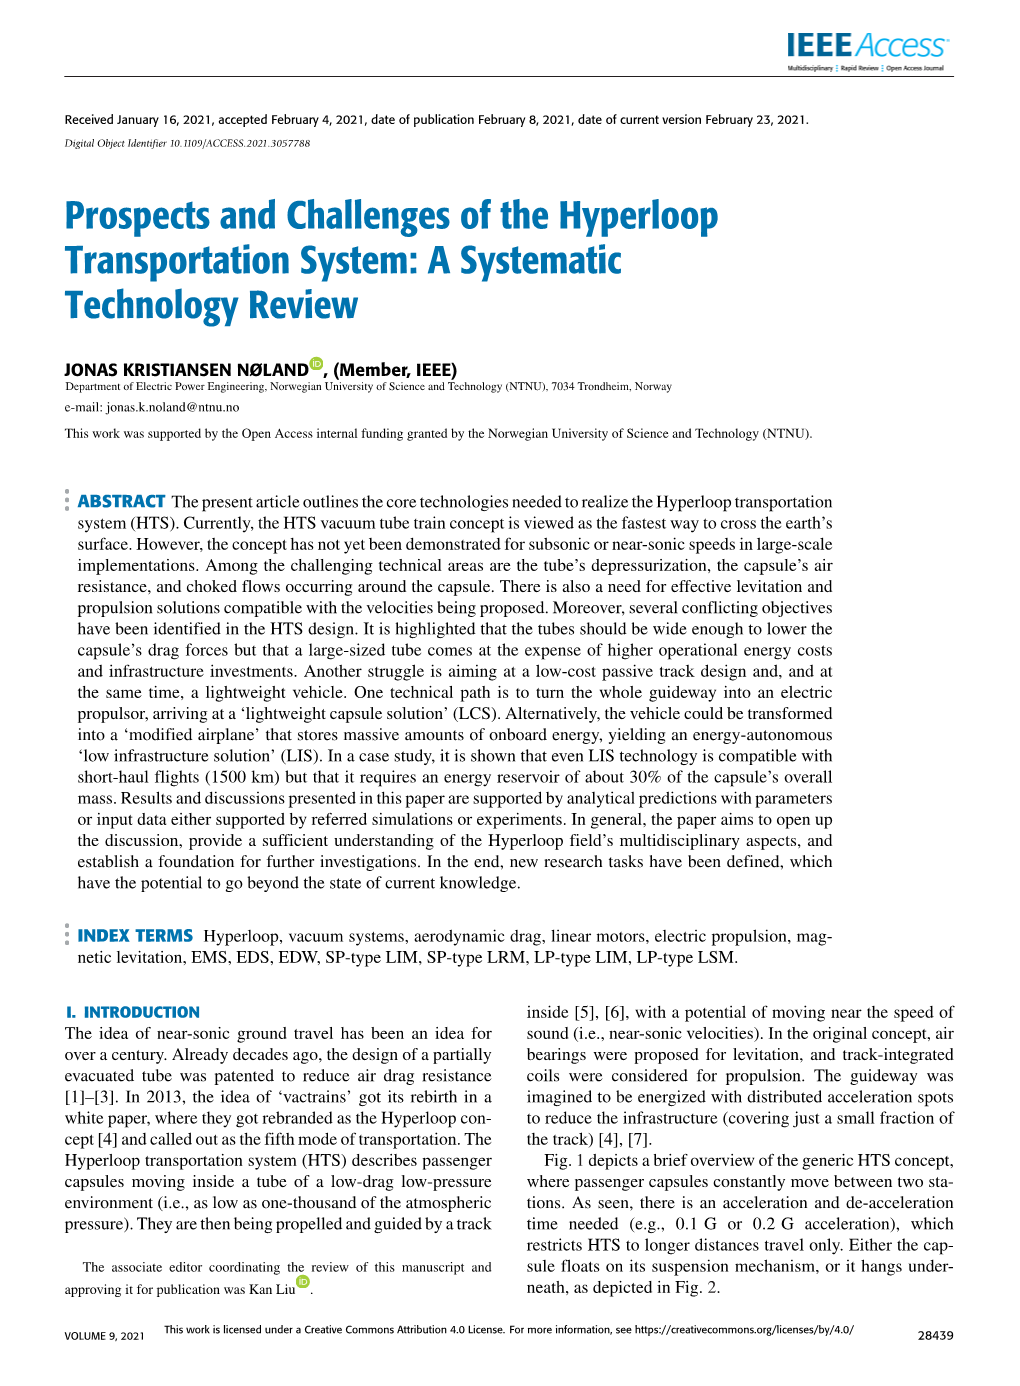 Prospects and Challenges of the Hyperloop Transportation System: a Systematic Technology Review